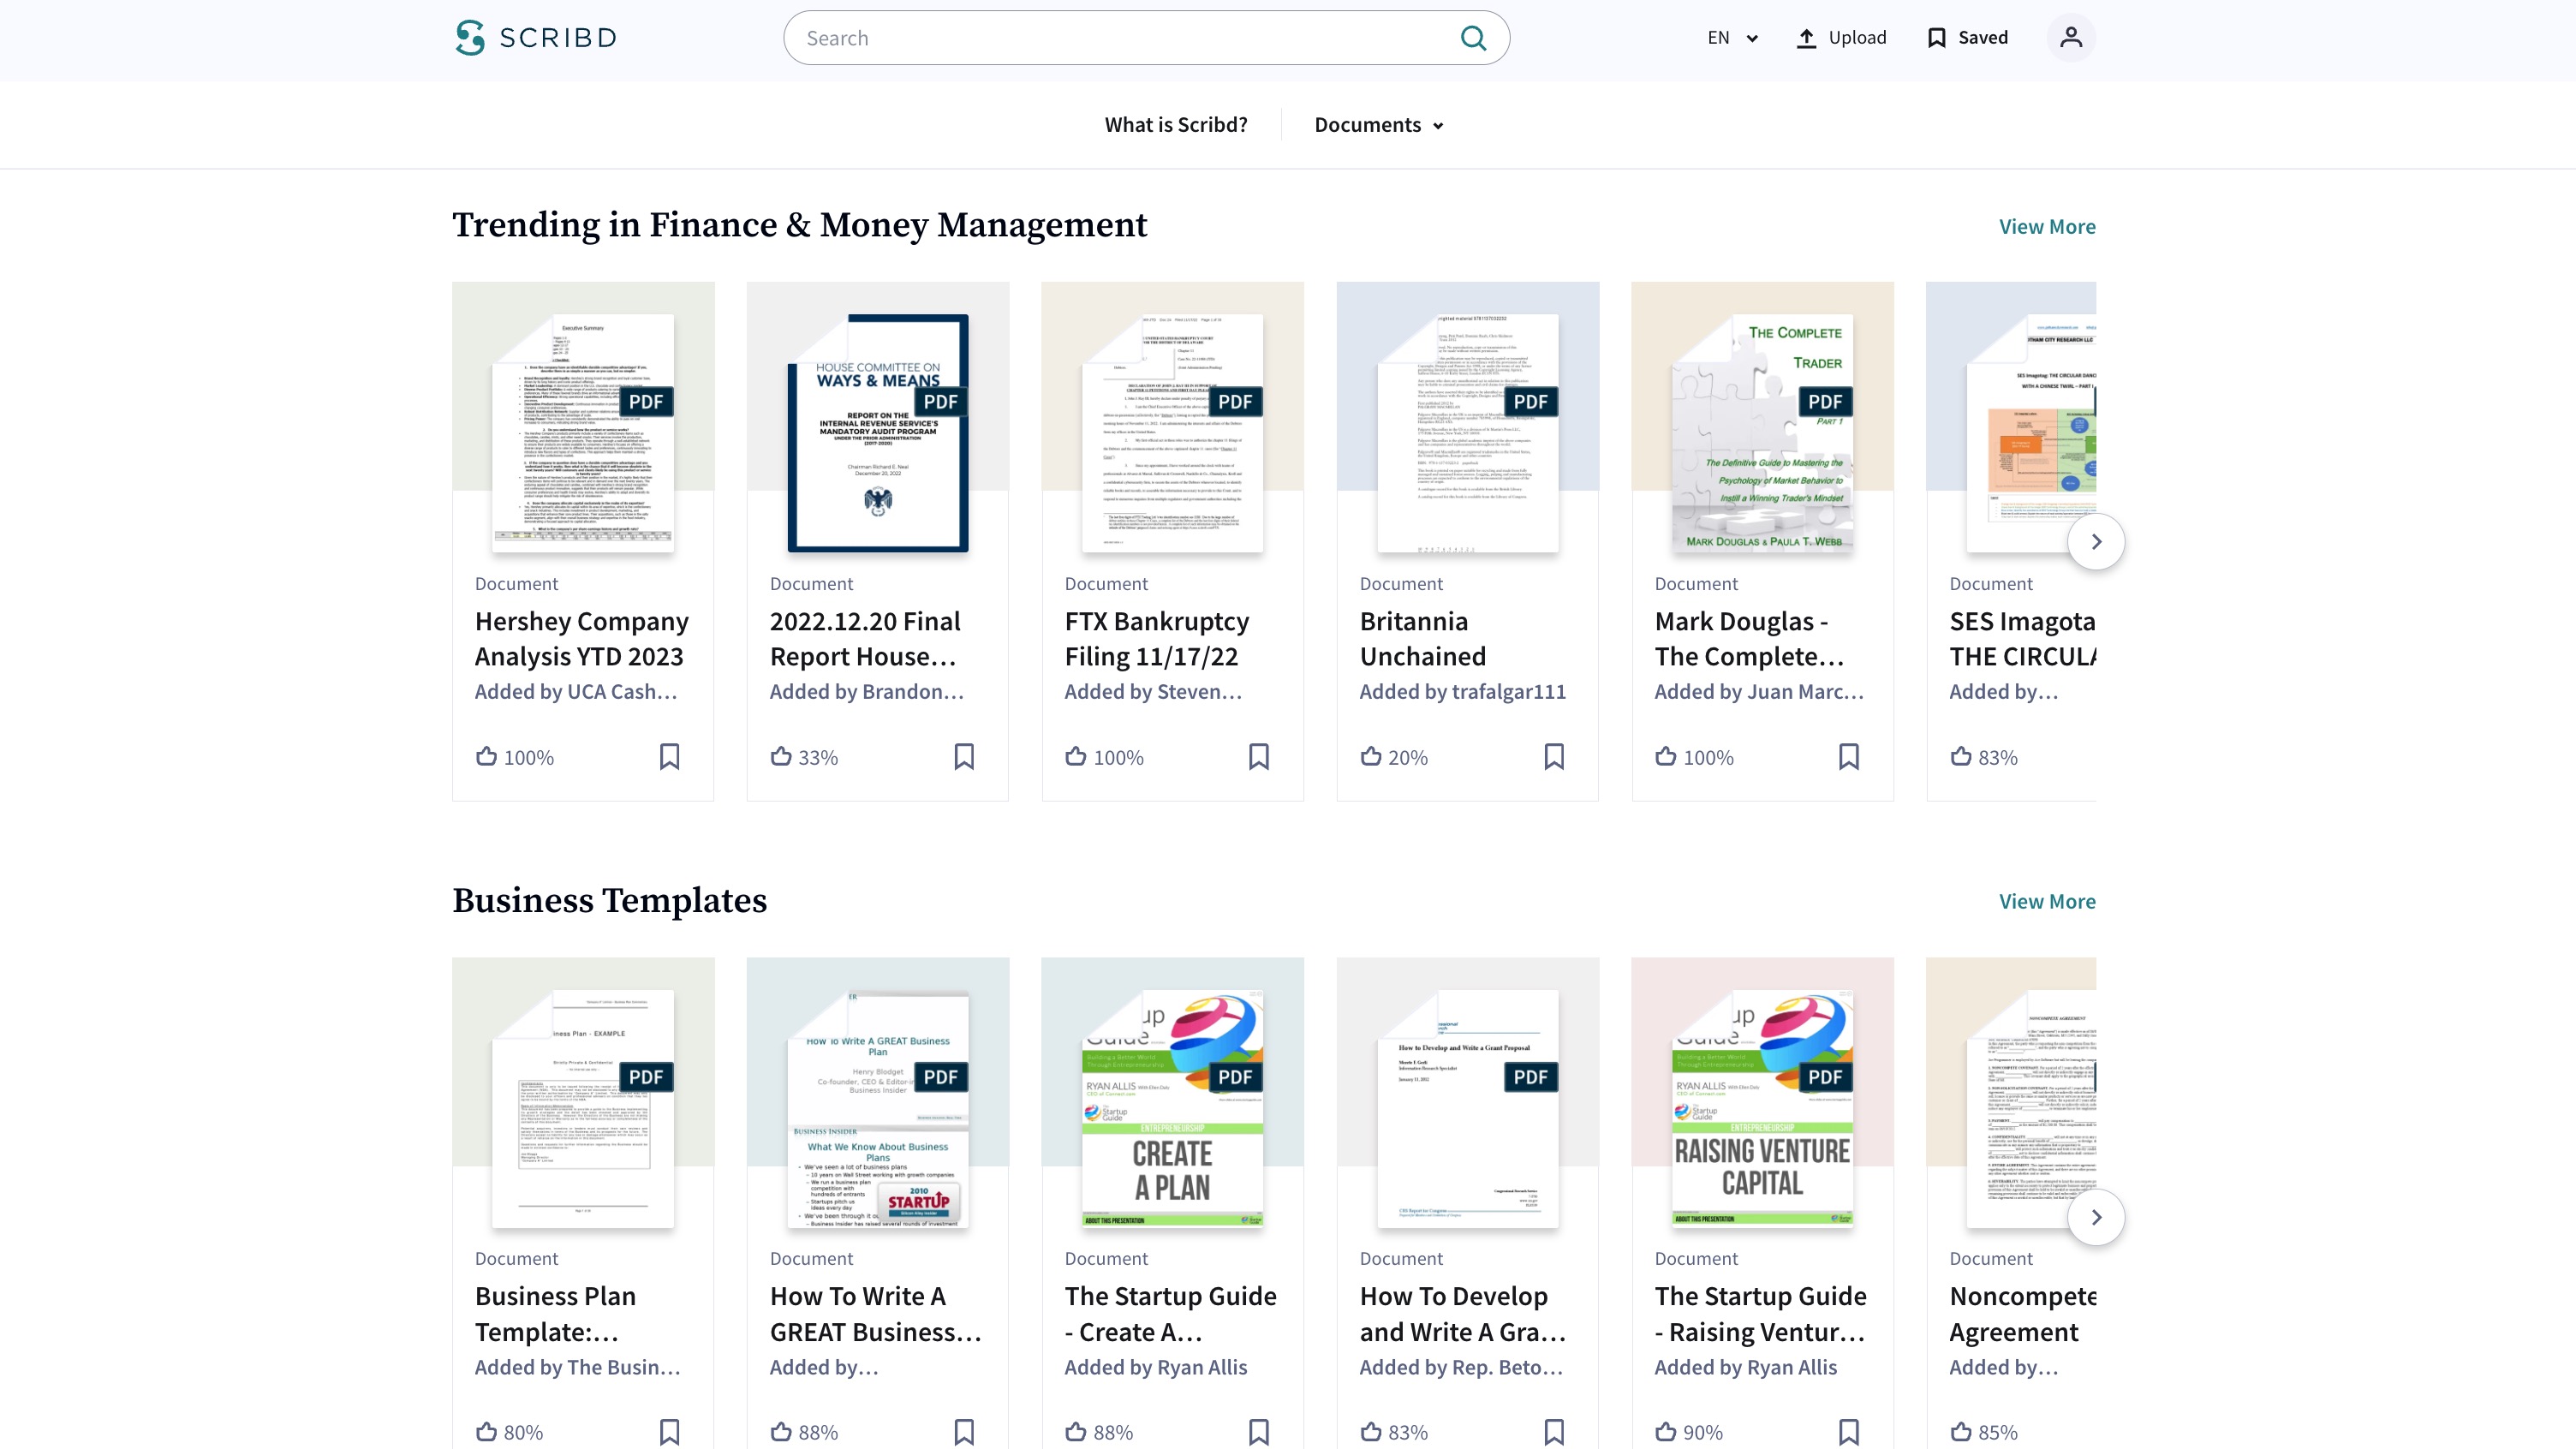 The Scribd homepage with documents